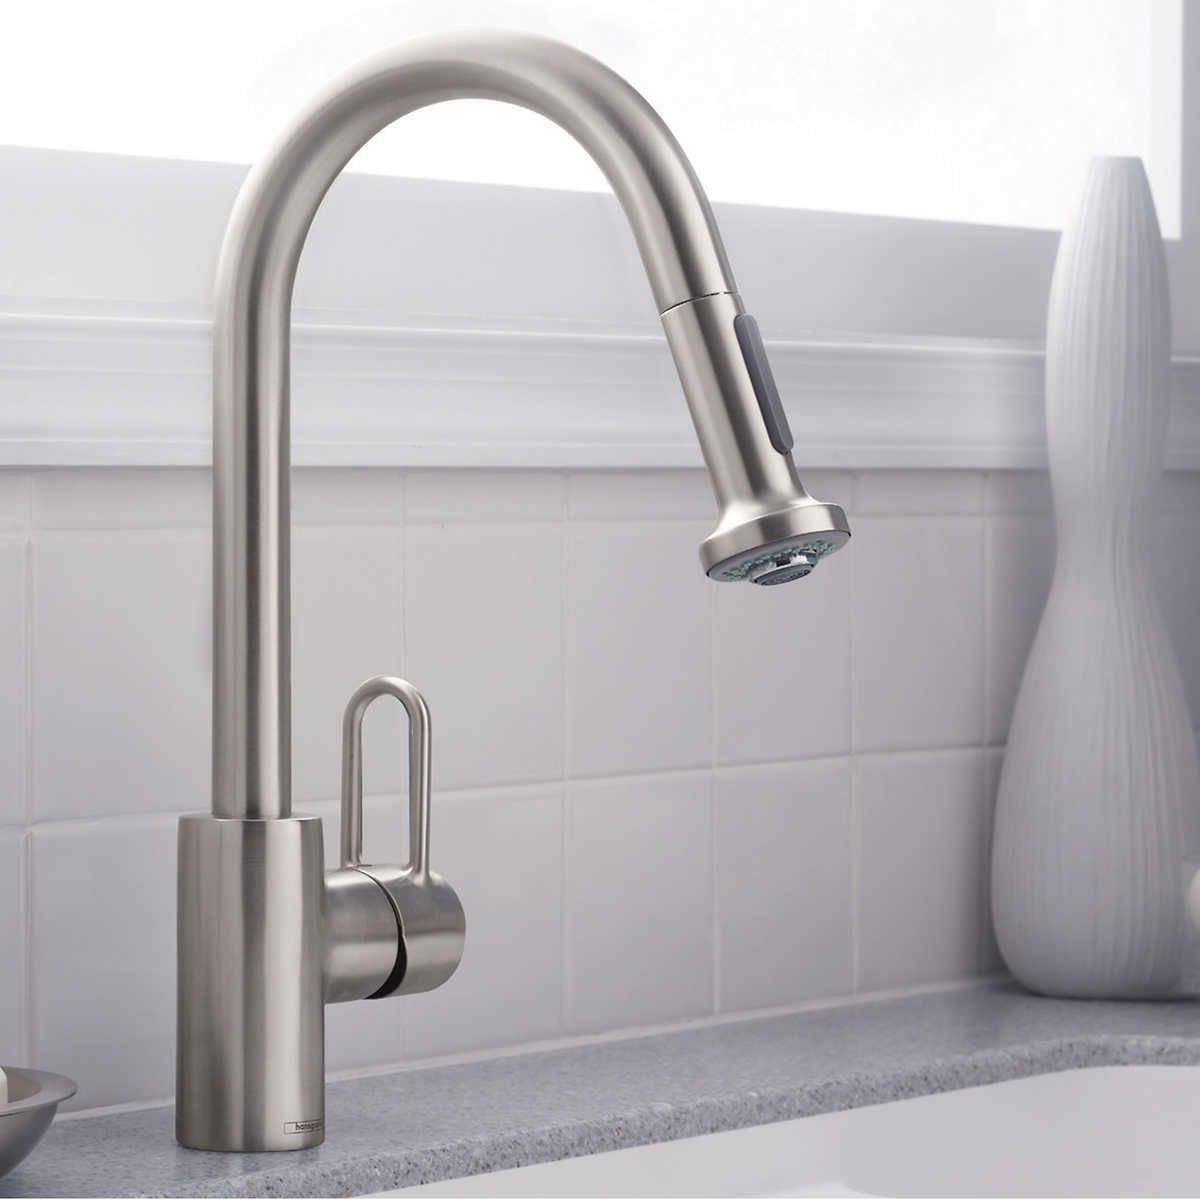 Hansgrohe Metro HighArc Kitchen Faucet With 2 Function Pull Down